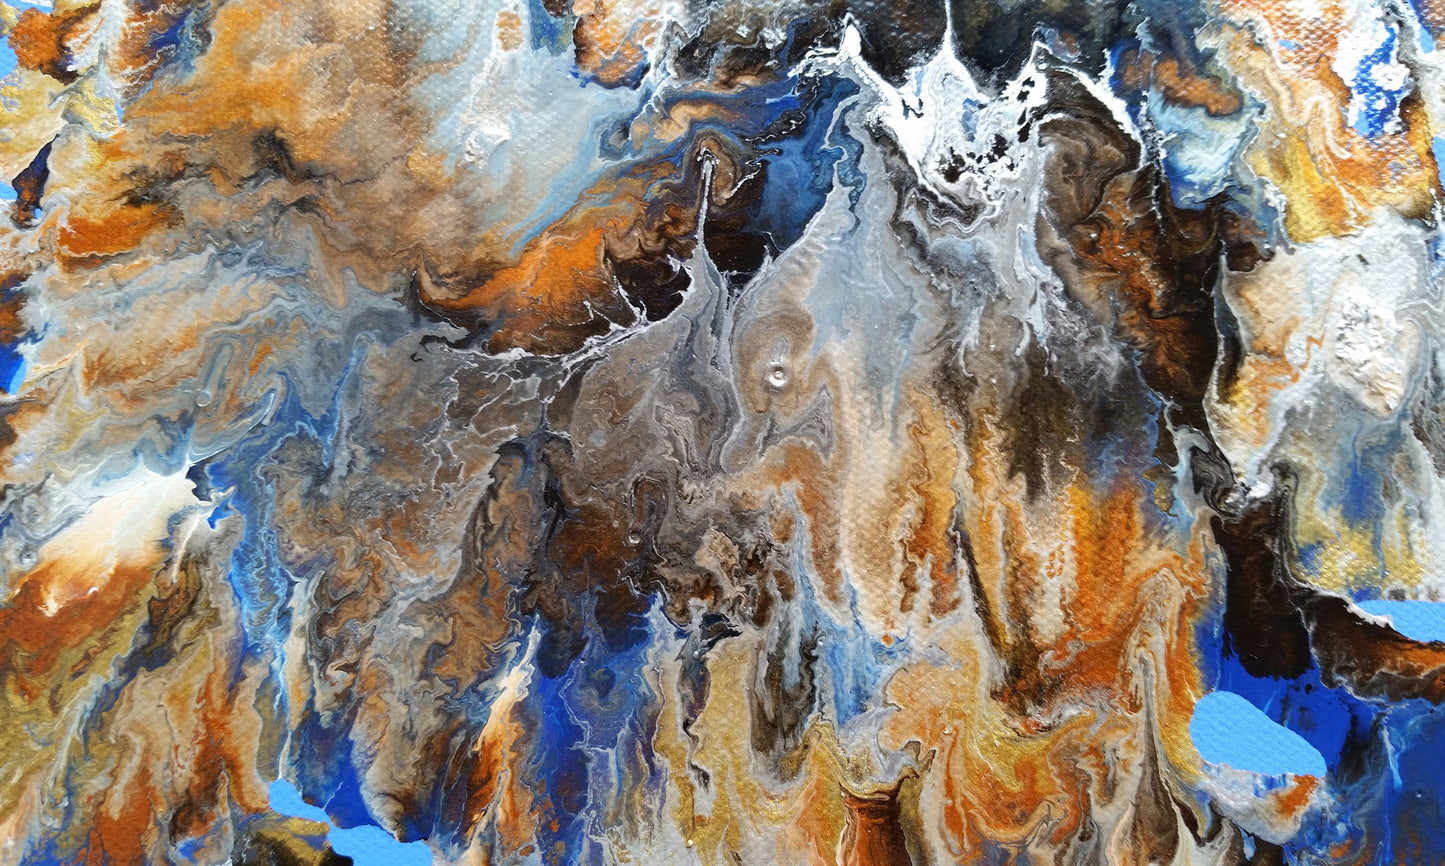 Abstract Fluid Painting Mixed Media Enamel Paint Canvas Blue Waves Ocean Water Relaxing Calming Artwork Copper Gold Silver